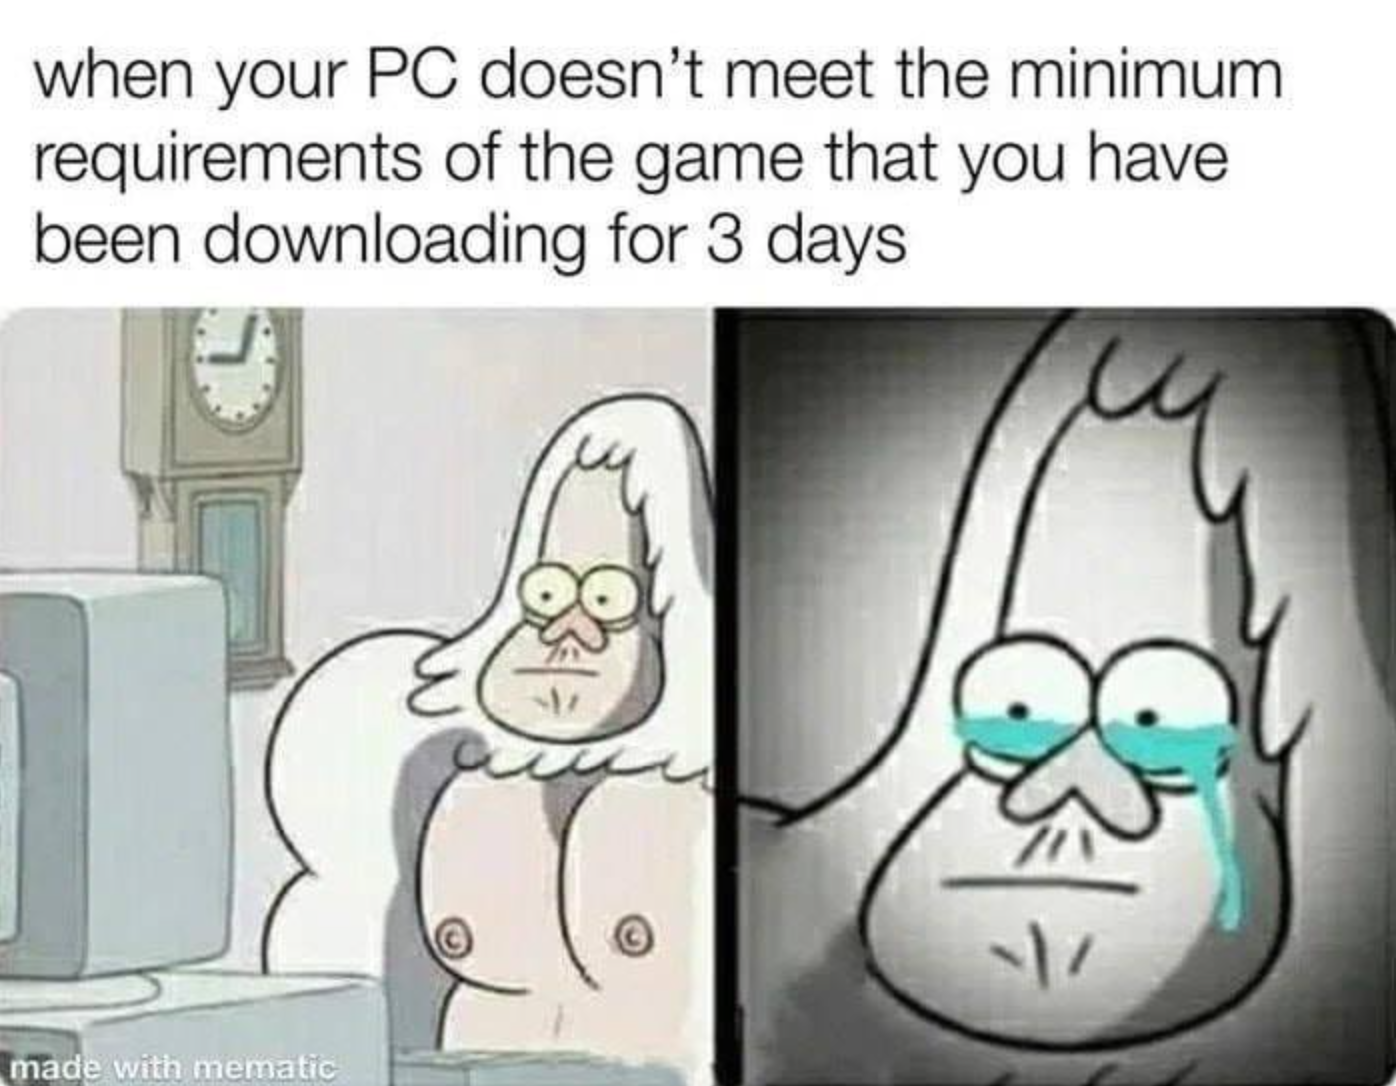 video game memes - random meme - when your Pc doesn't meet the minimum requirements of the game that you have been downloading for 3 days made with mematic